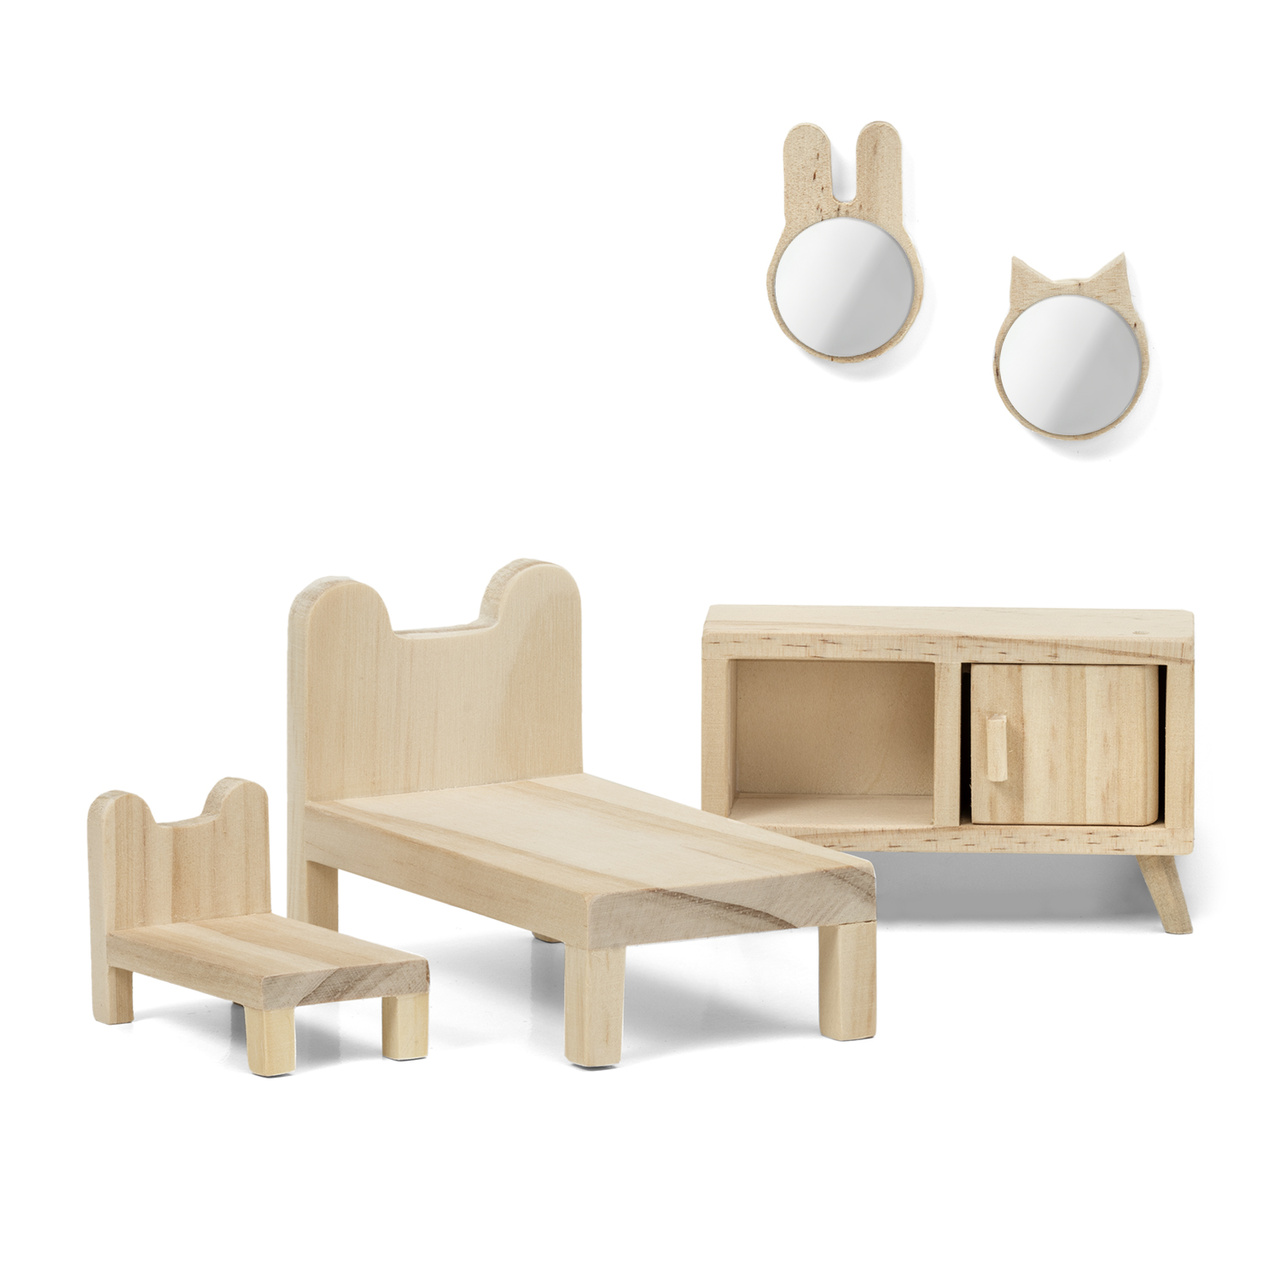 Doll house furniture & doll house accessories lundby dollhouse furniture bedroom set natural wood